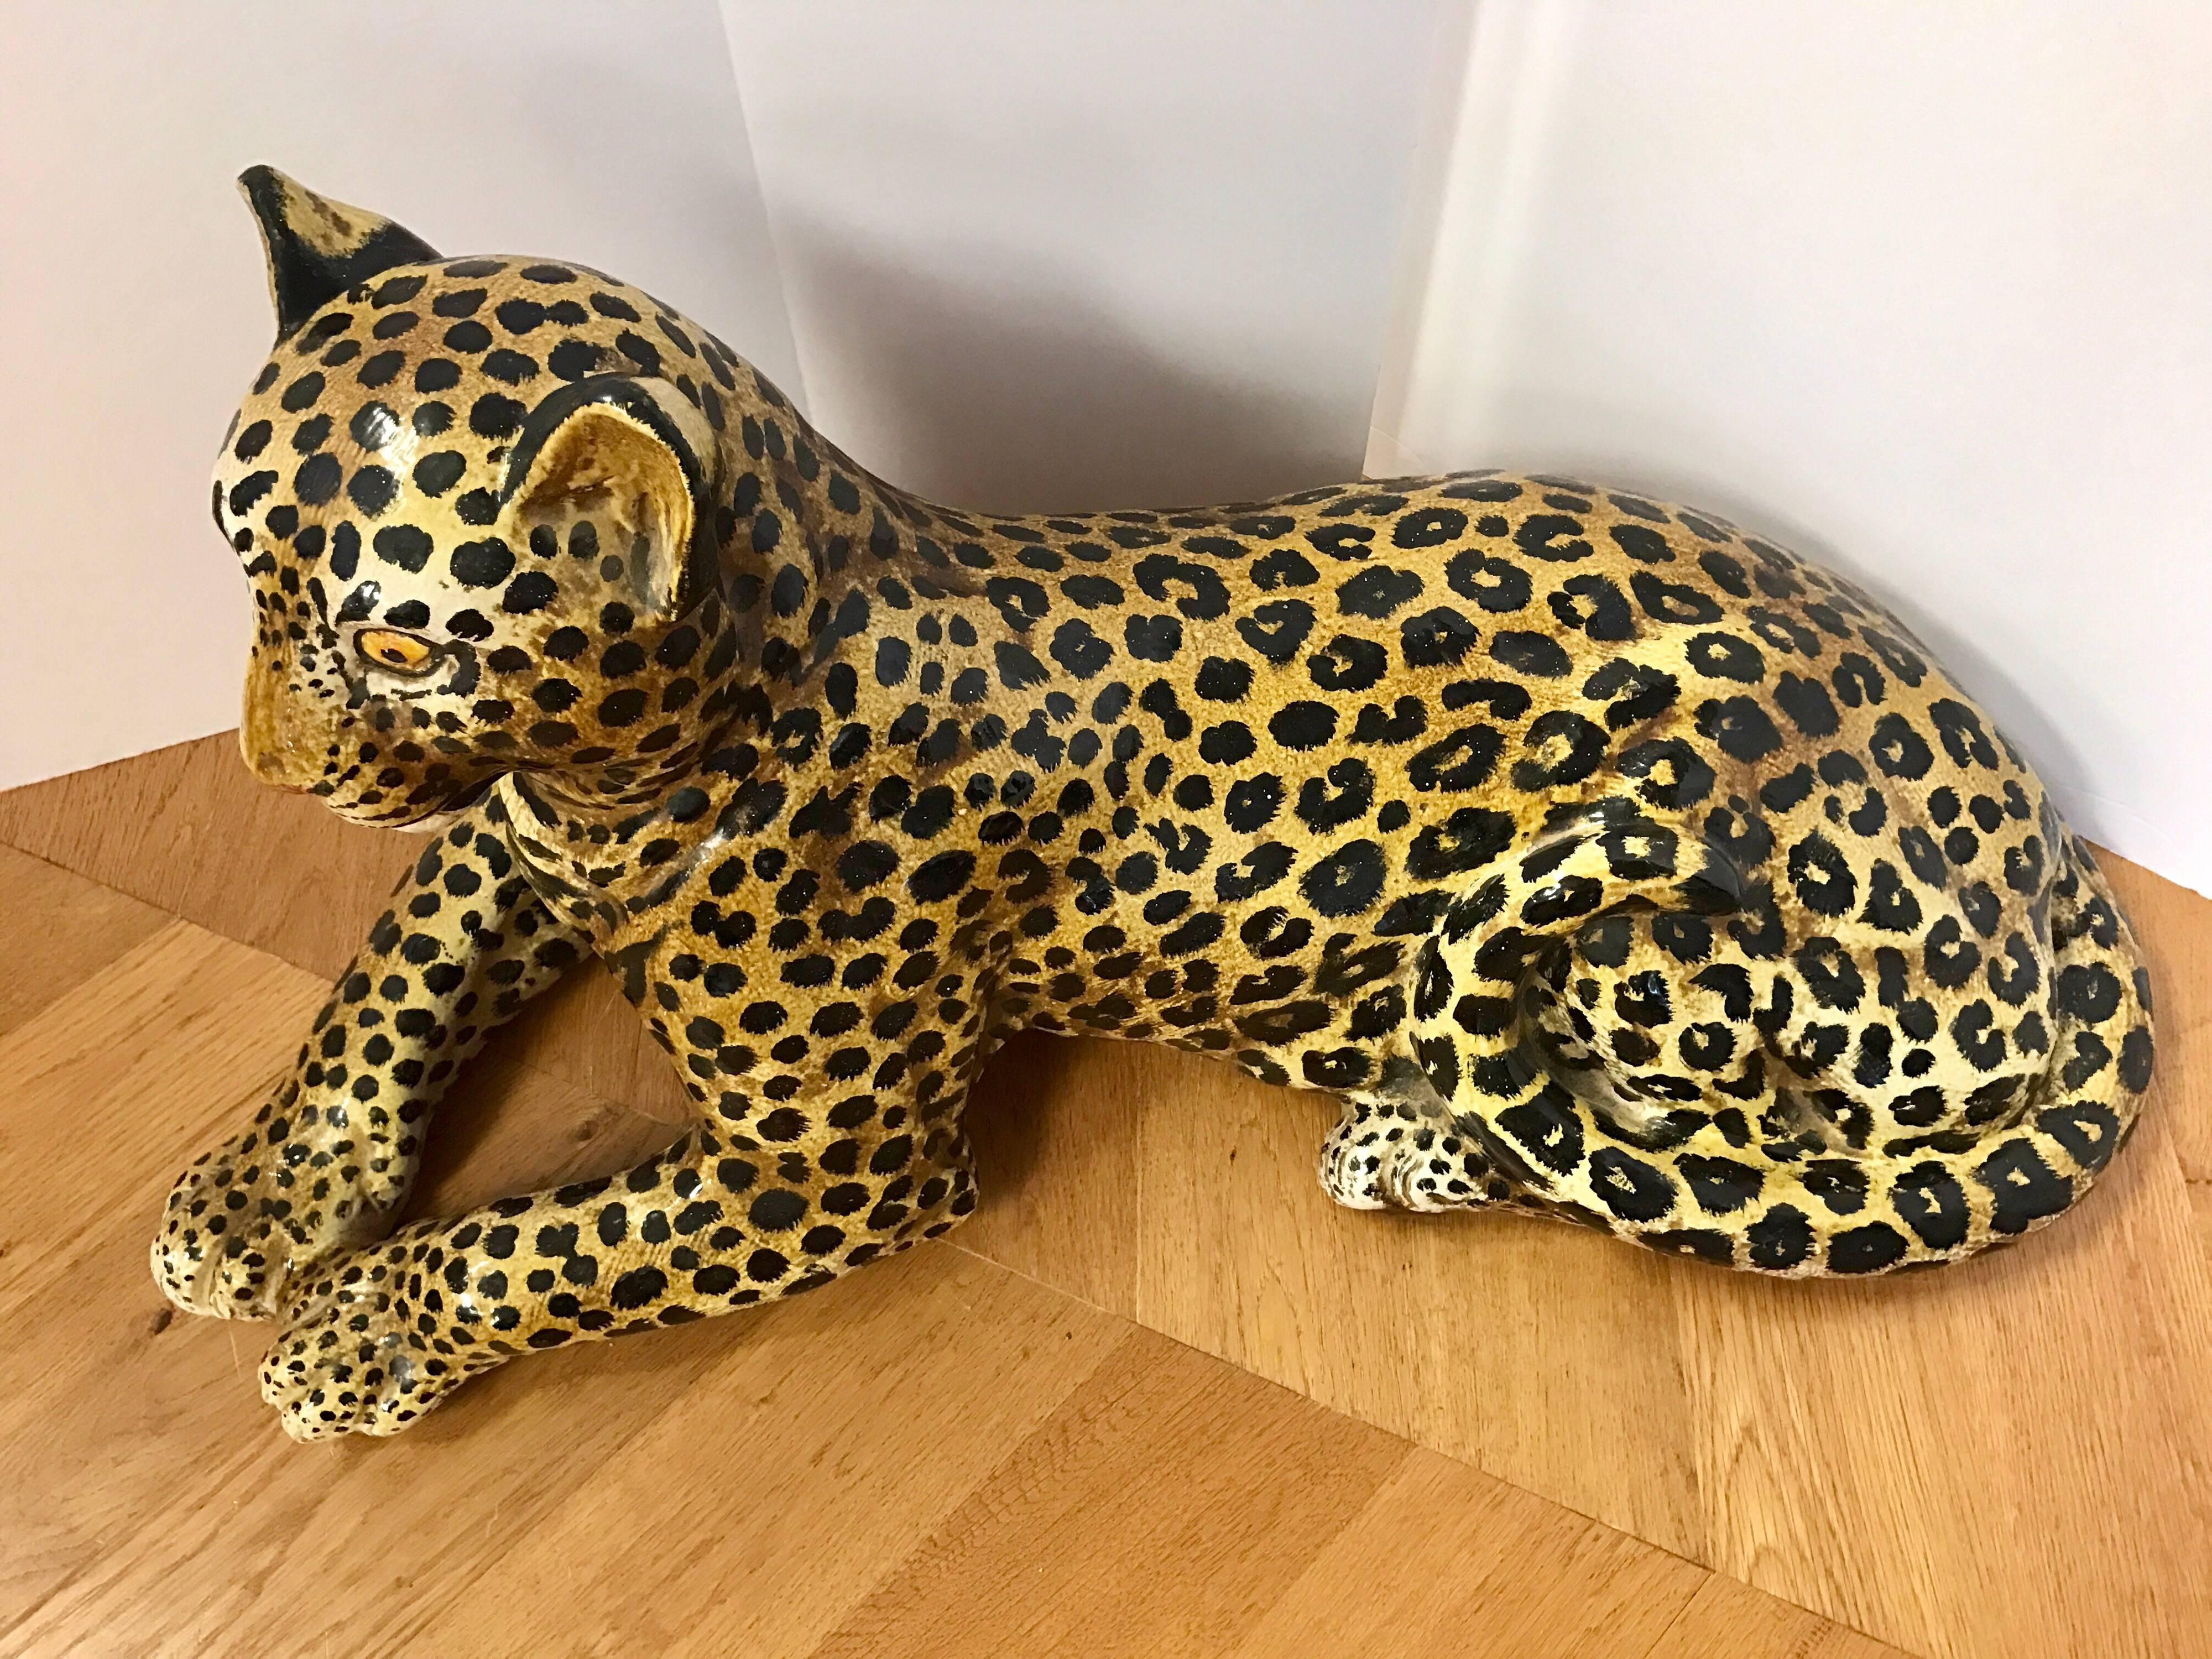 Hallmarker made in Italy crouching spotted leopard done completely in glazed porcelain.
A must have!